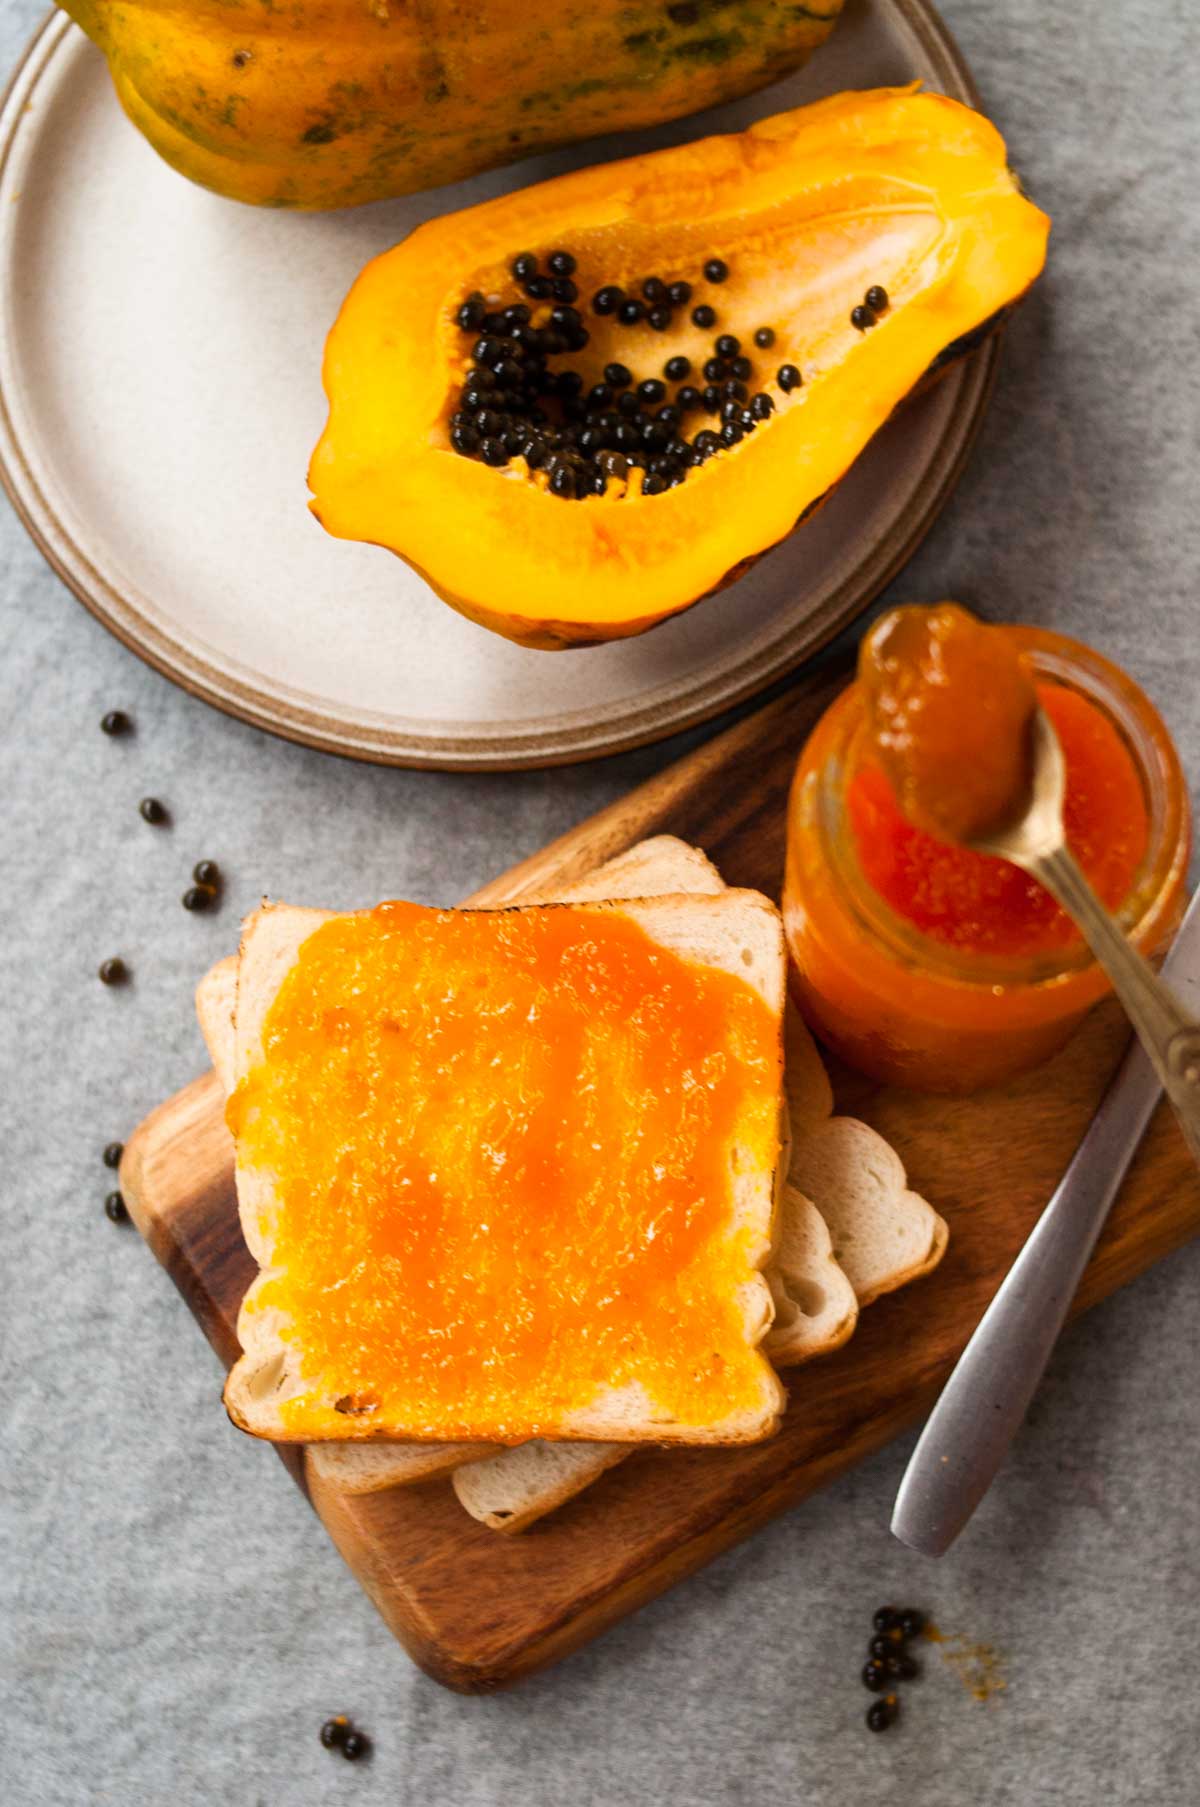 Papaya and the jam on the bread and spoon.